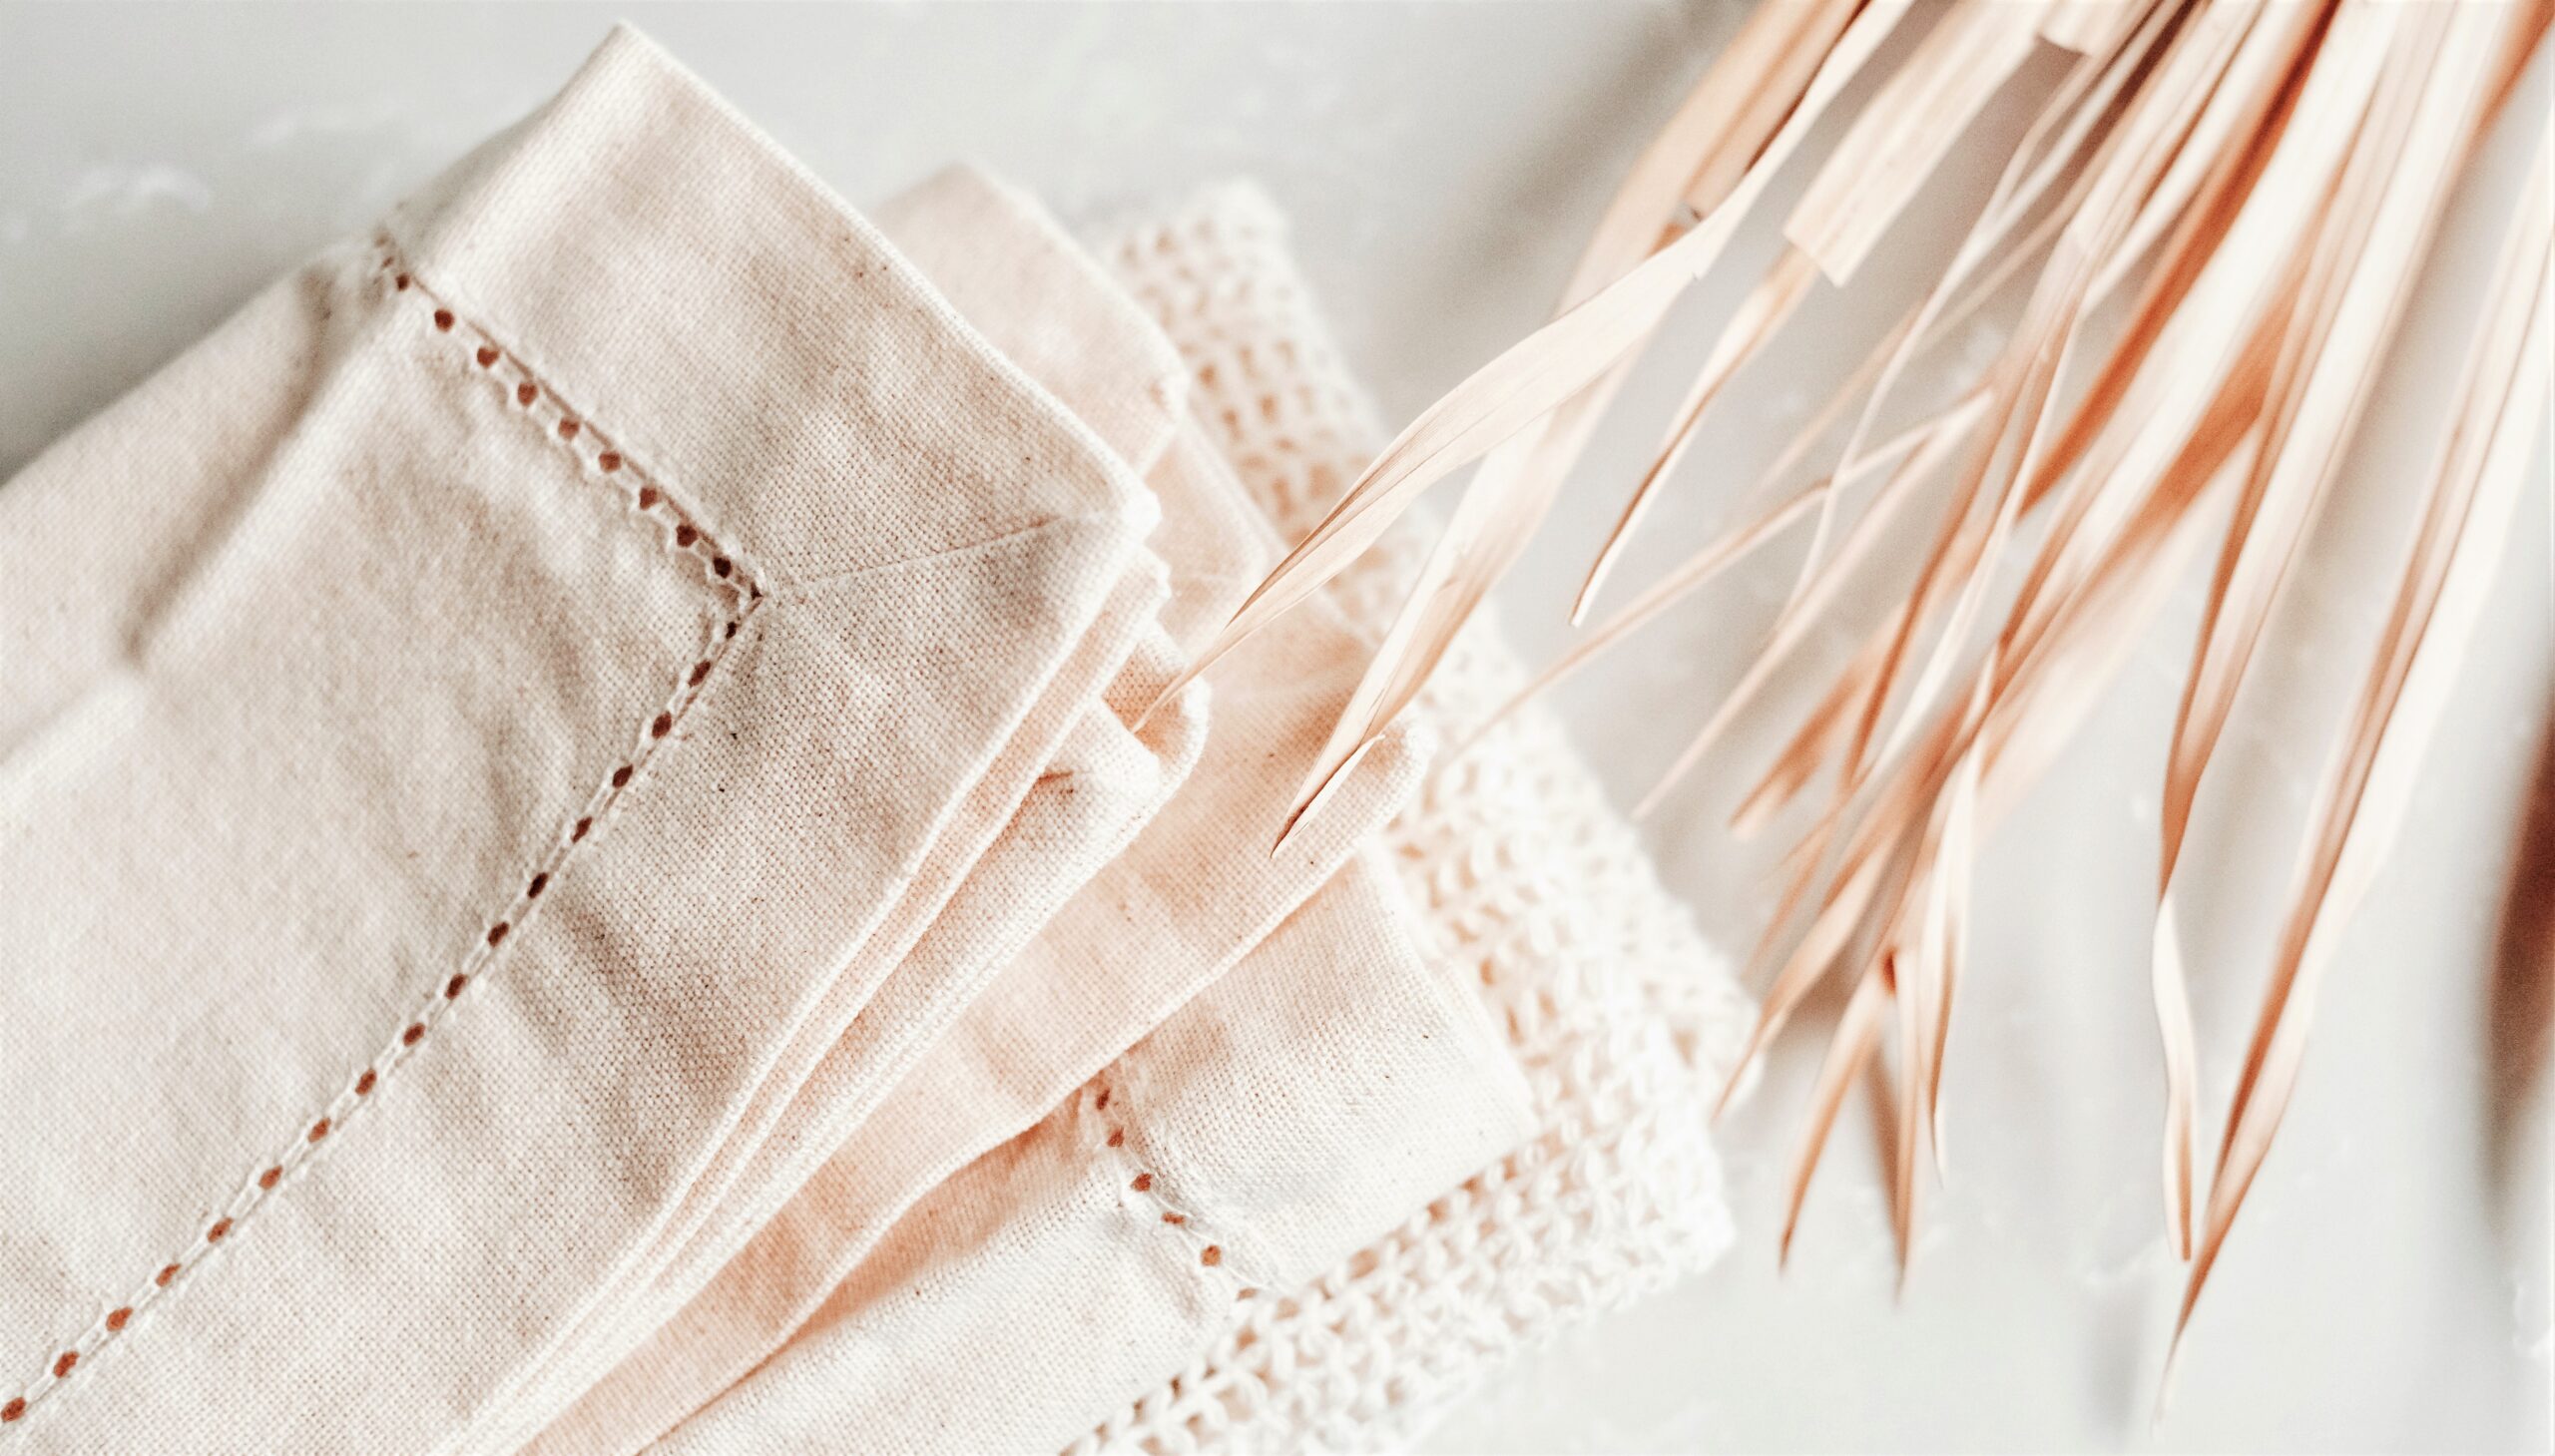 Natural white napkins with detailed borders are resting on a crisp bright white linen tablecloth.